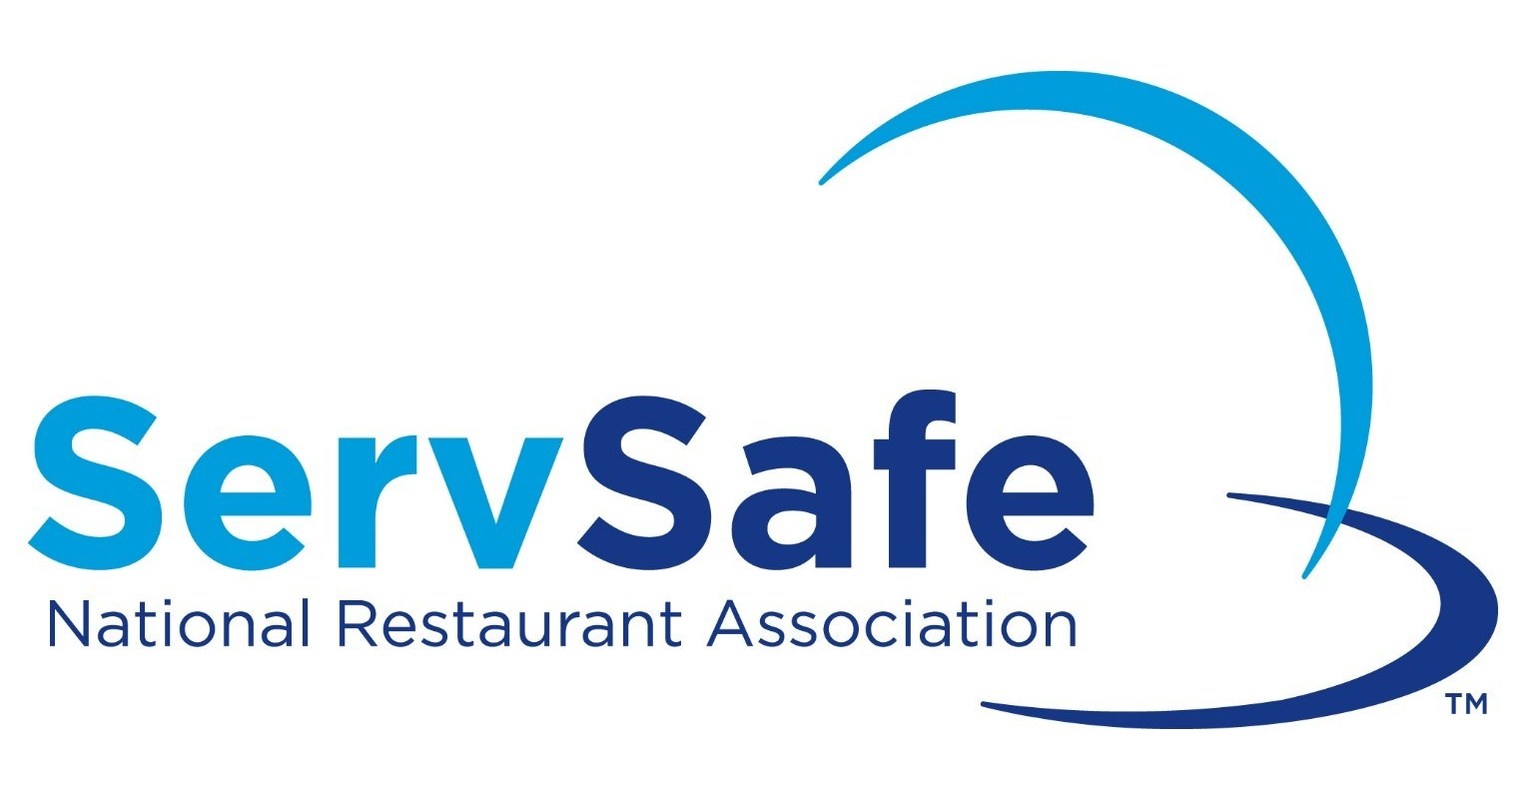 ServSafe Offers New Safe Food Handling Training Modules on Takeout and